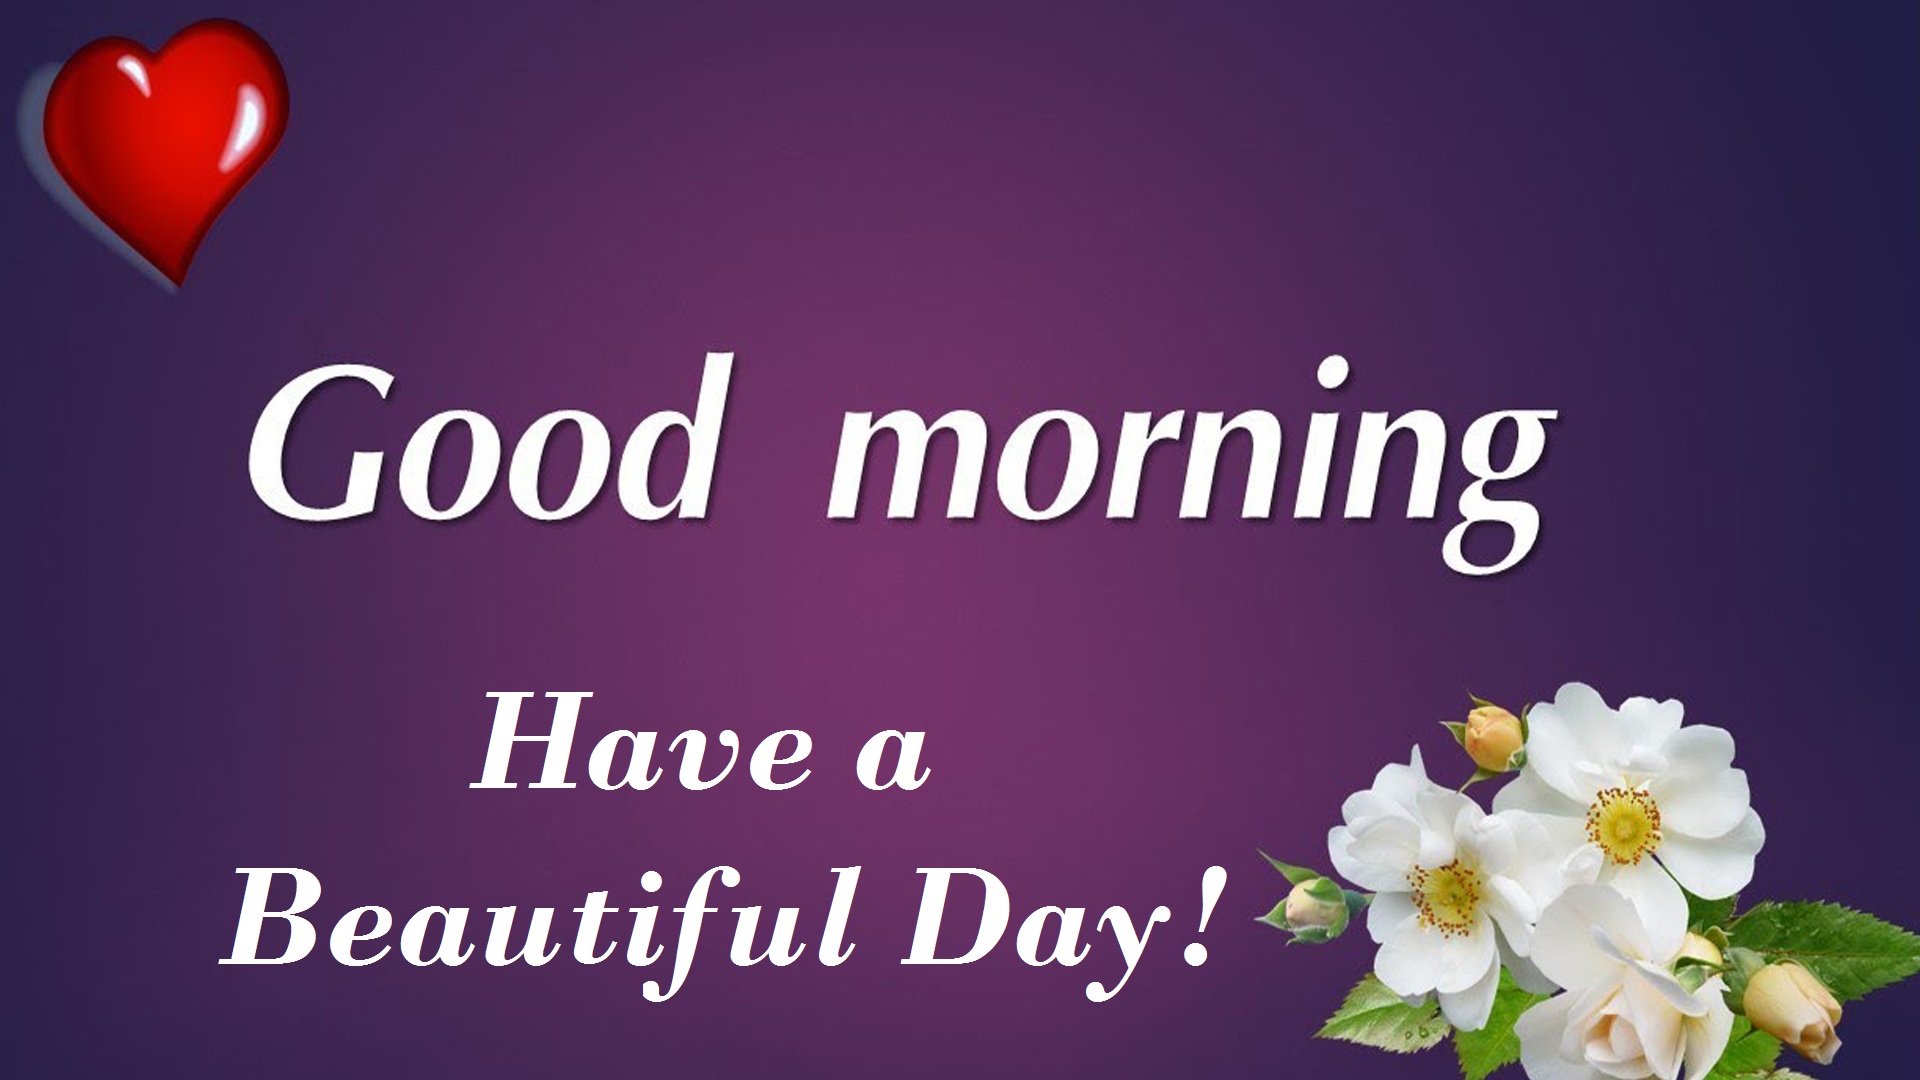 Good Morning Wishes & Greetings Images free download